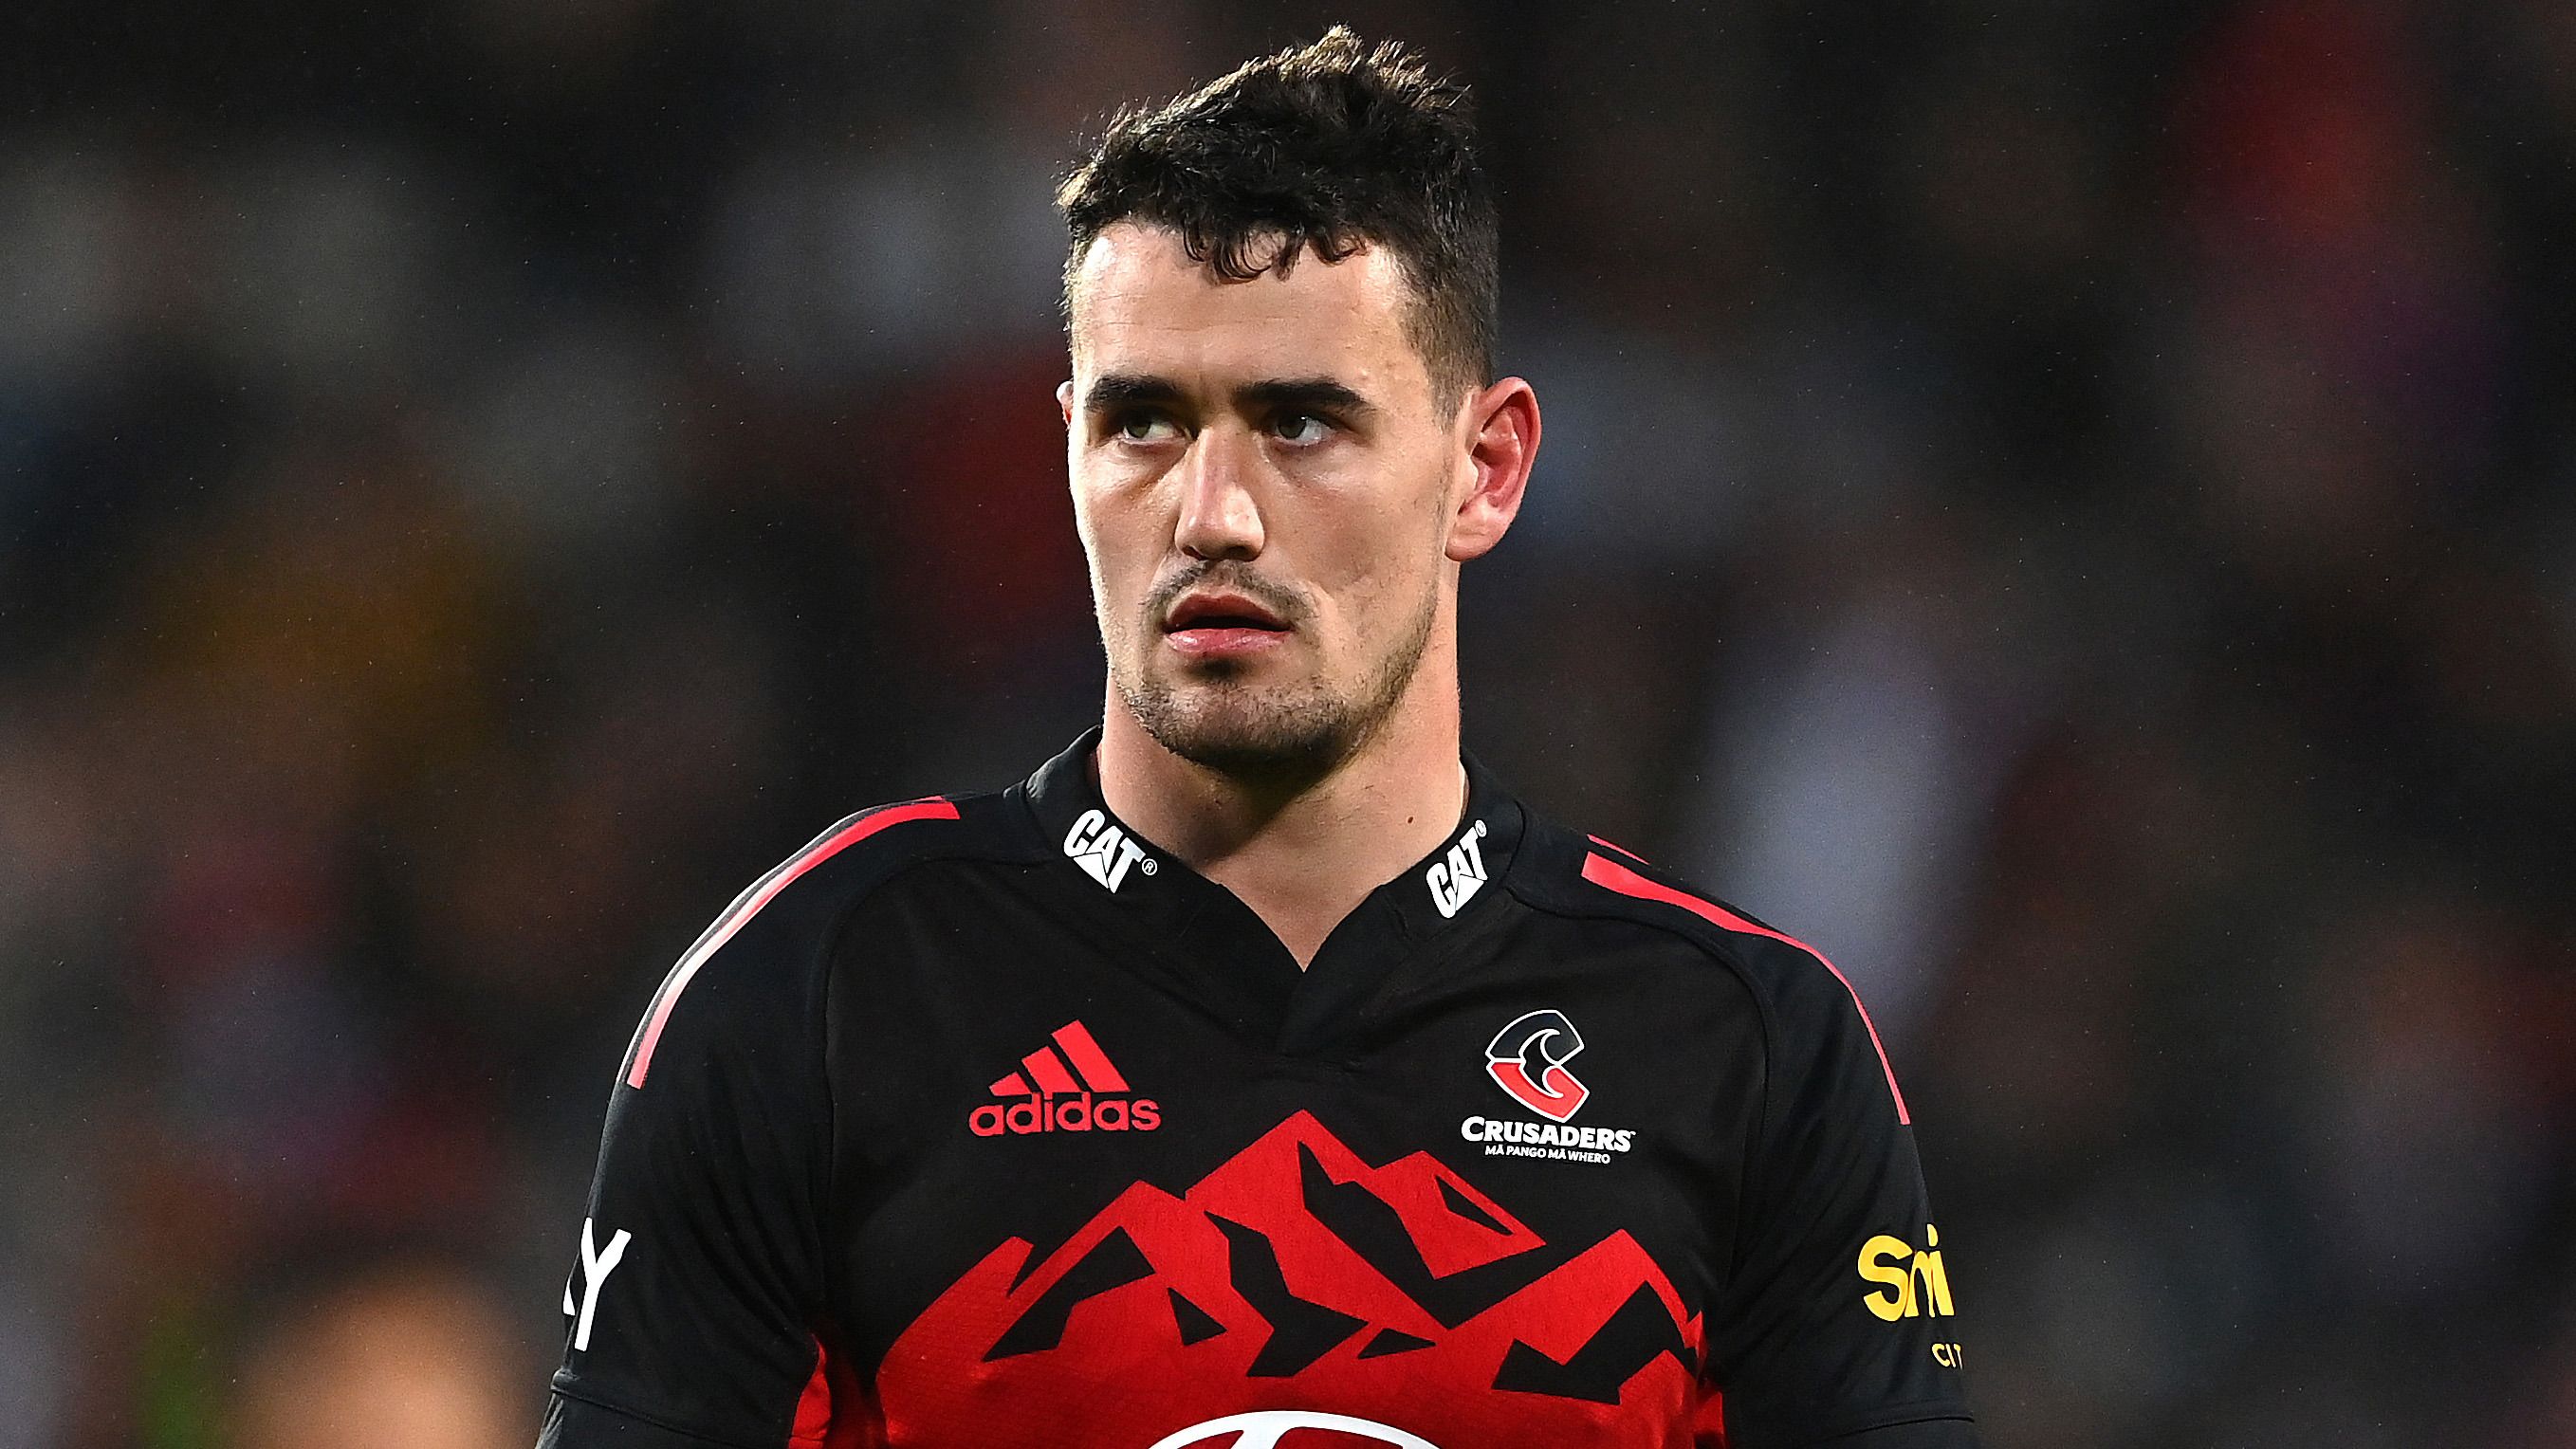 'We're gutted': Injured Crusaders star Will Jordan to miss Super Rugby Pacific season